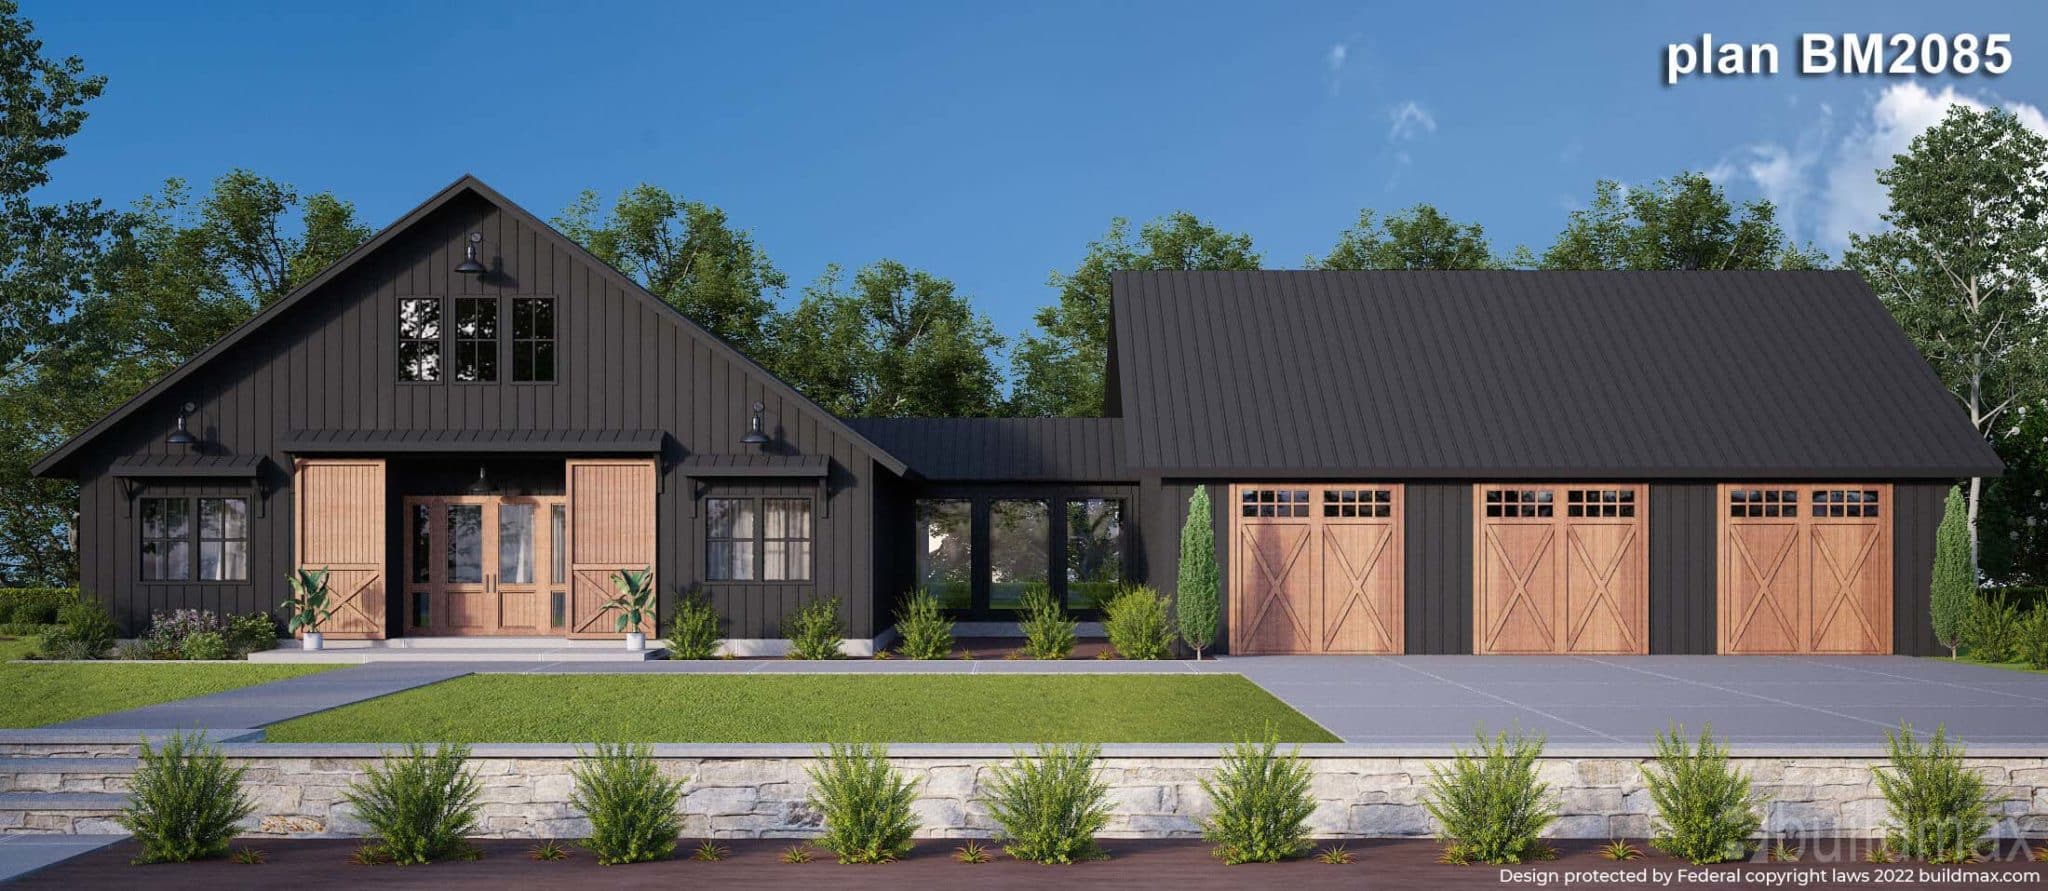 Black barndominium with 3 car garage, breezeway, and plants lining the front of the house